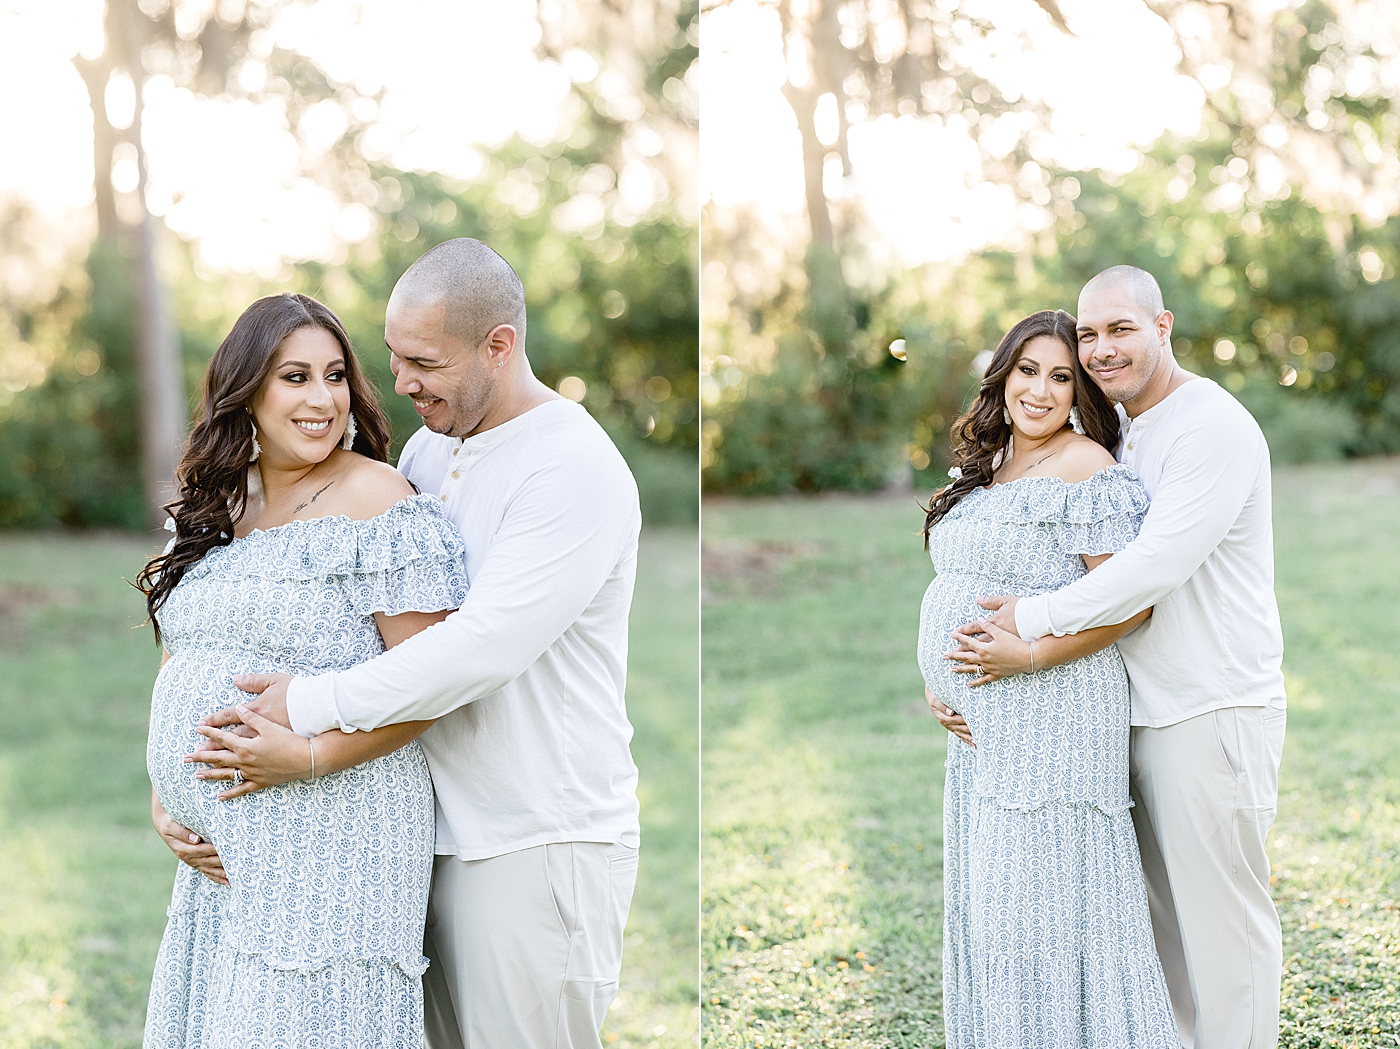 Sunset maternity session | Photo by Brittany Elise Photography.